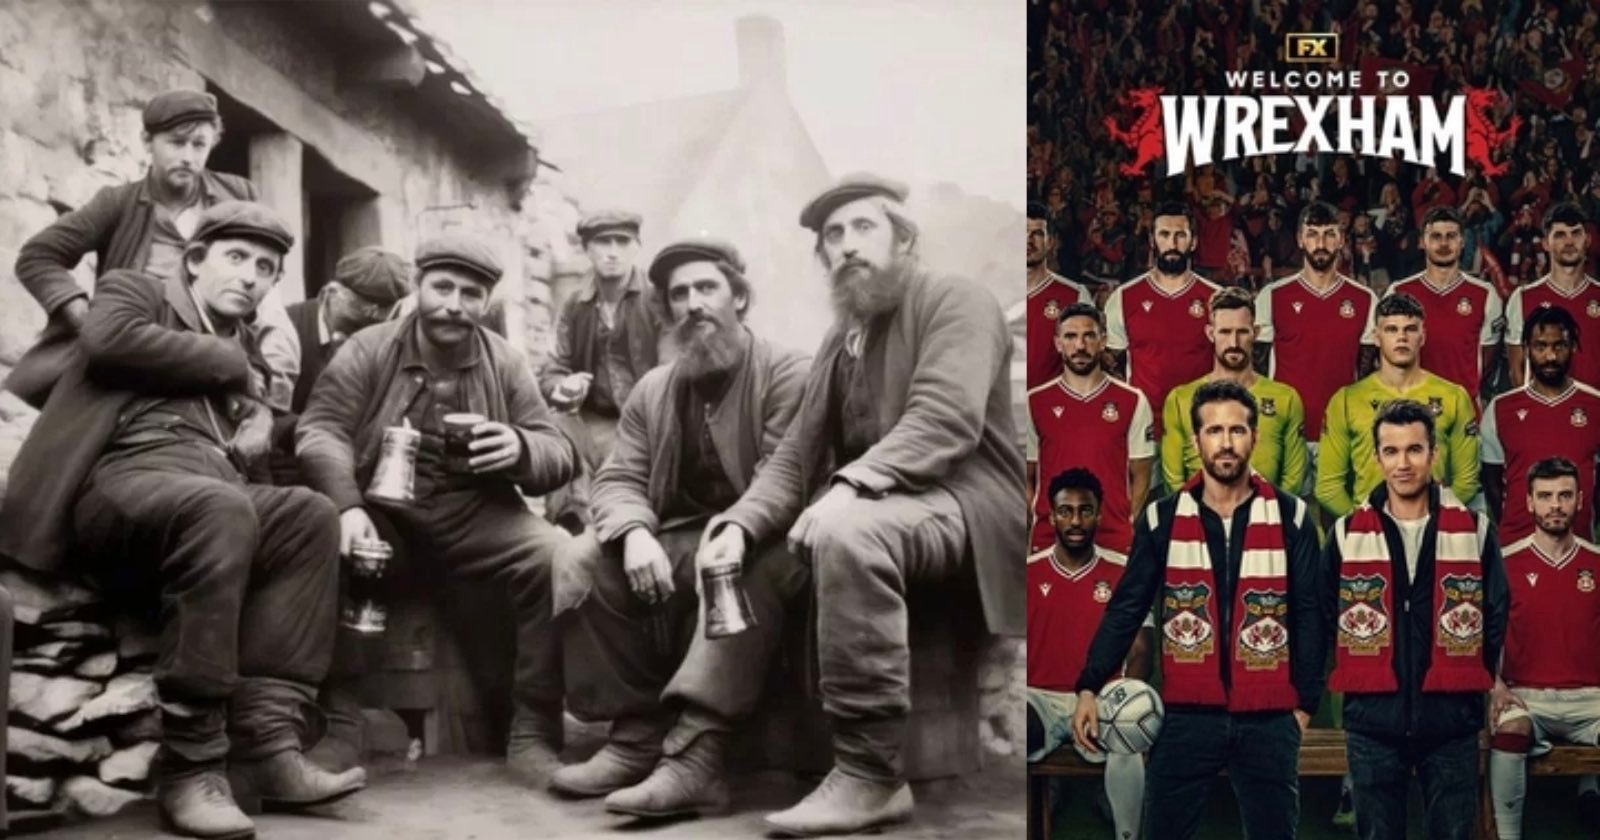 Did Welcome to Wrexham Doc Pass Off AI Image as Historical Photo?